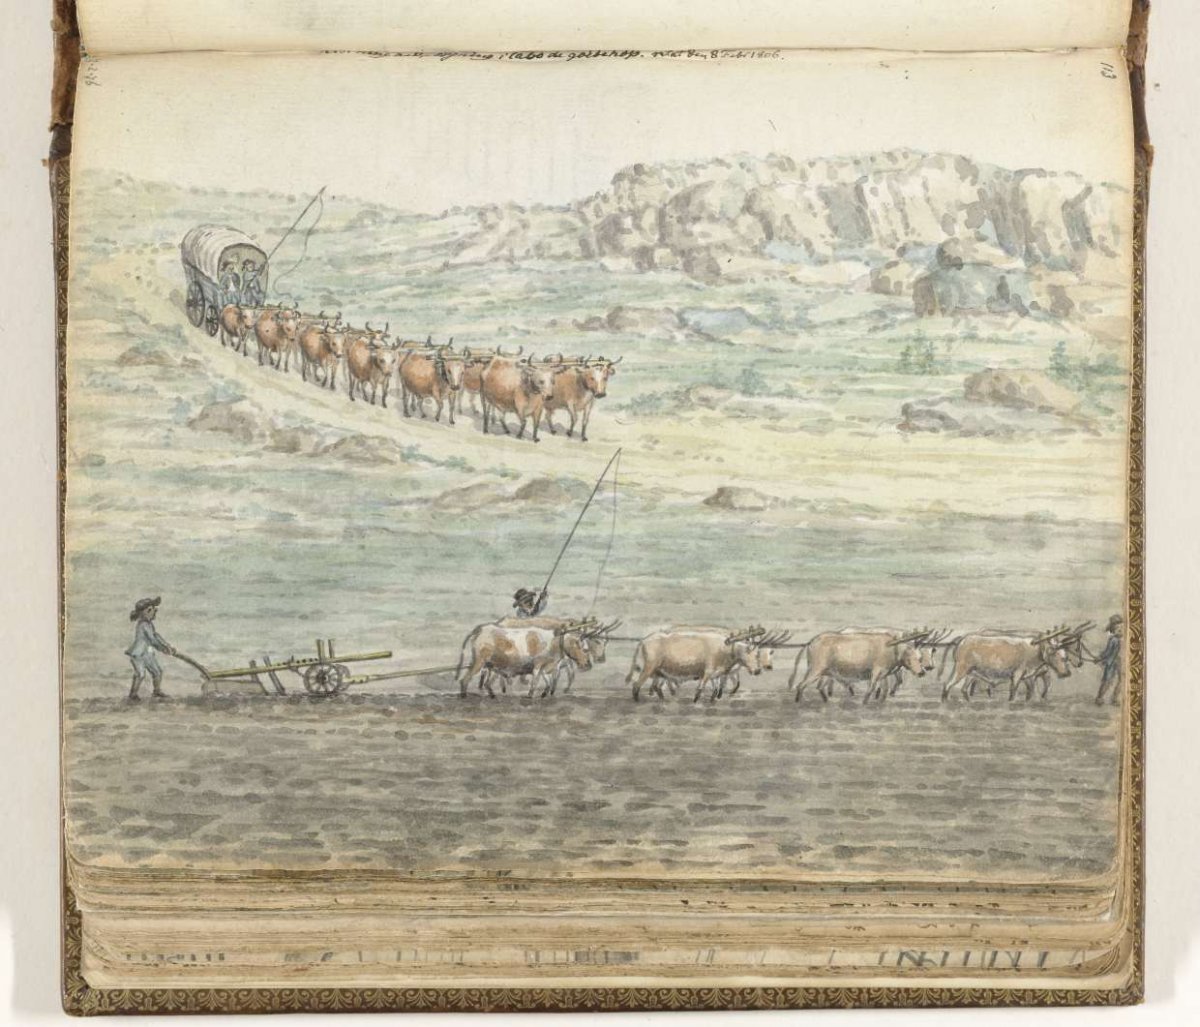 Ox team for covered wagon and for plow, Jan Brandes, 1806